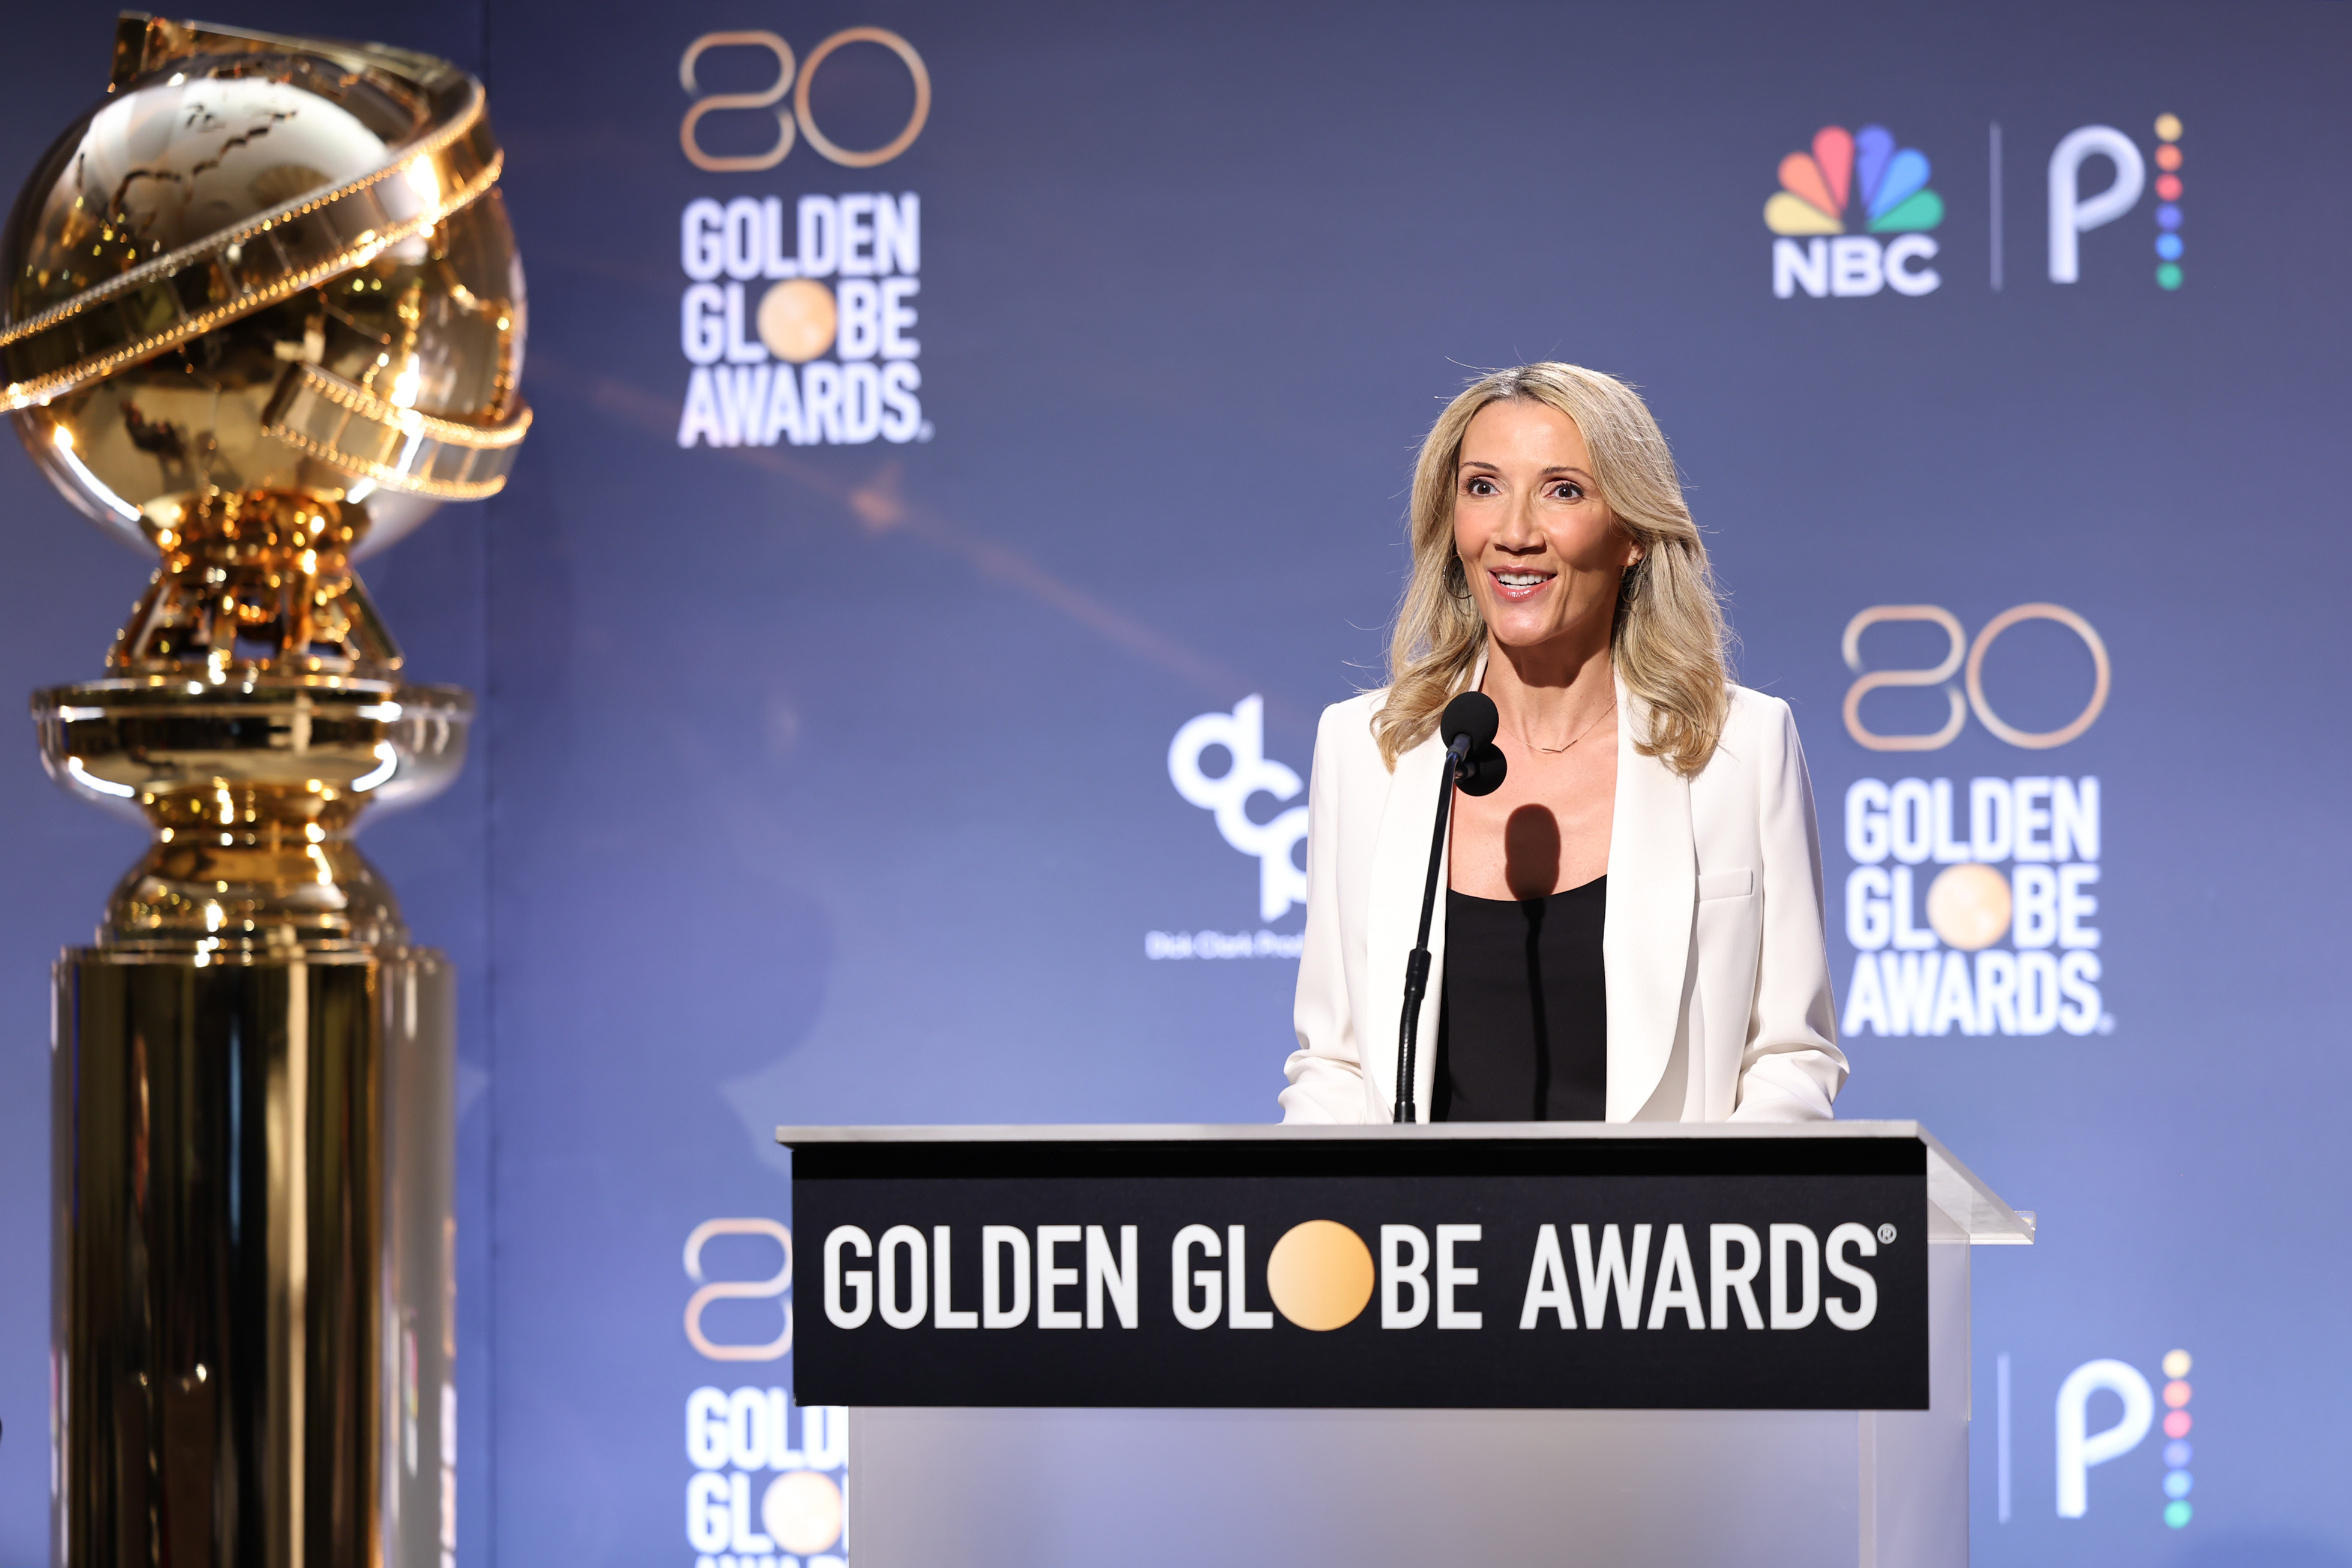 Golden Globes 2023 nominations: Key takeaways and full list of